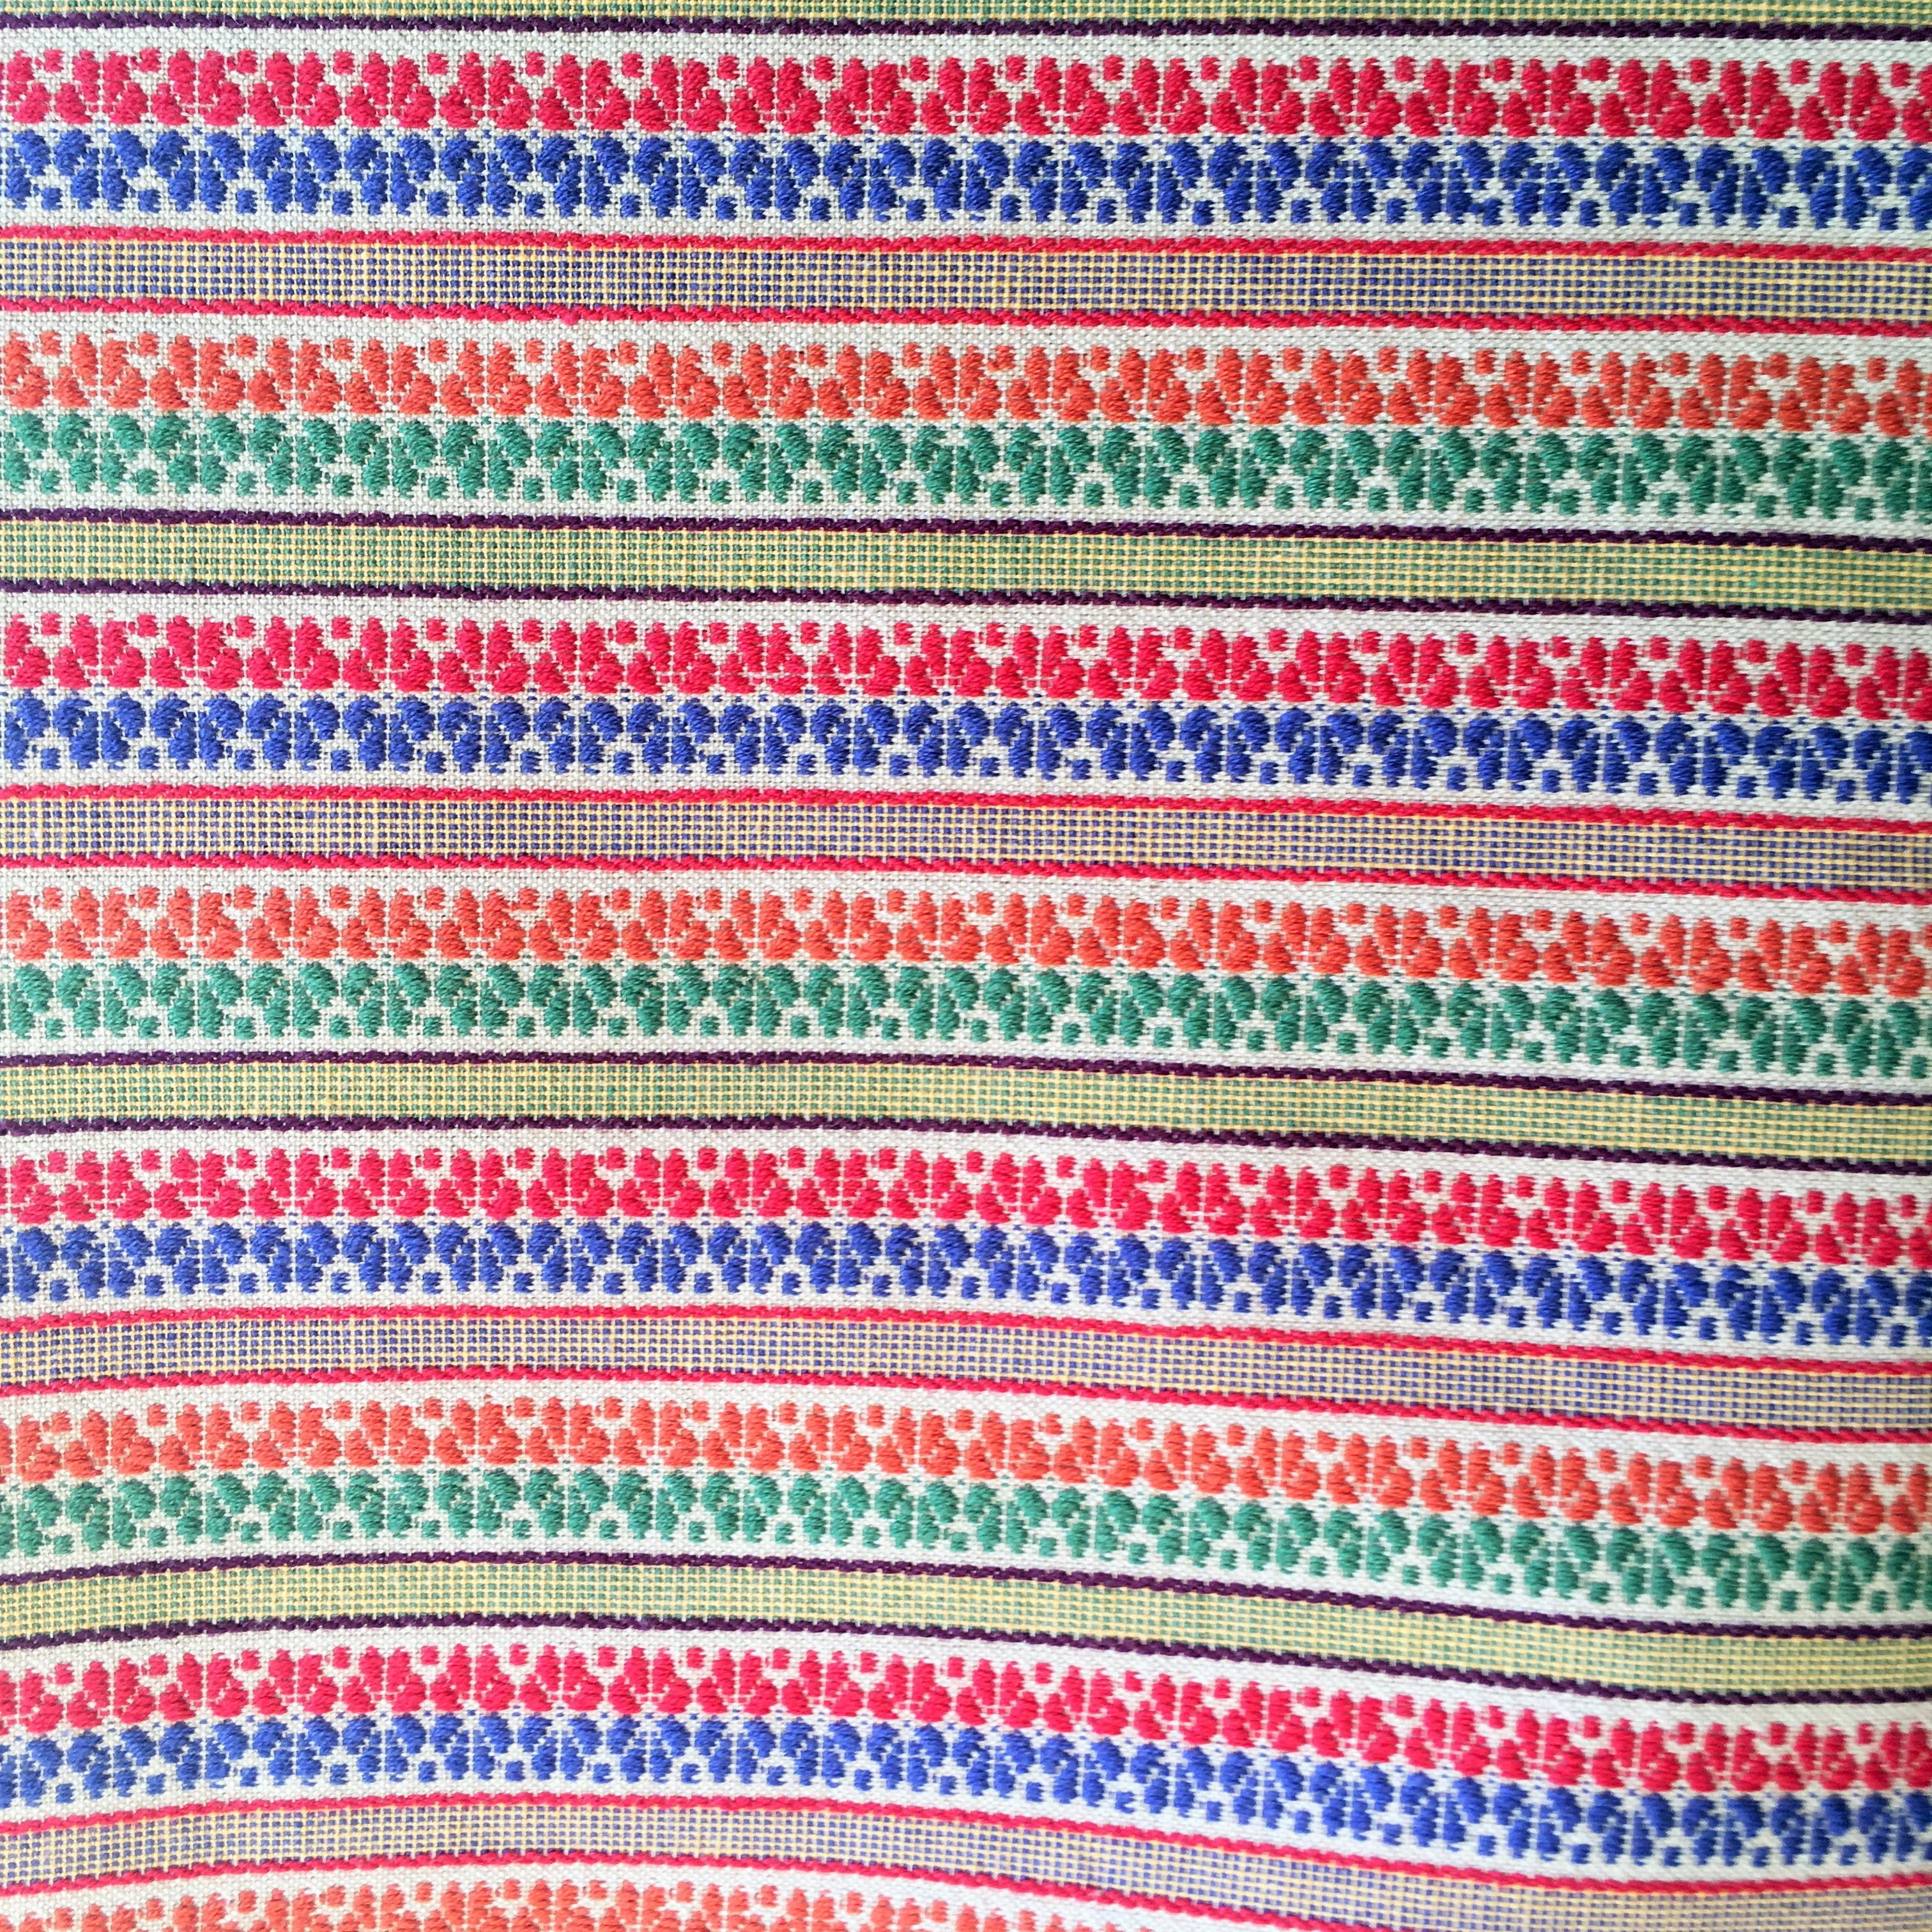 Textile Art
This is a beautiful remnant of a vintage floral textile. The design is woven on lightweight cotton and runs lengthwise as in the first image. Tan background, with floral motifs in medium green, primary blue, primary red, and deep